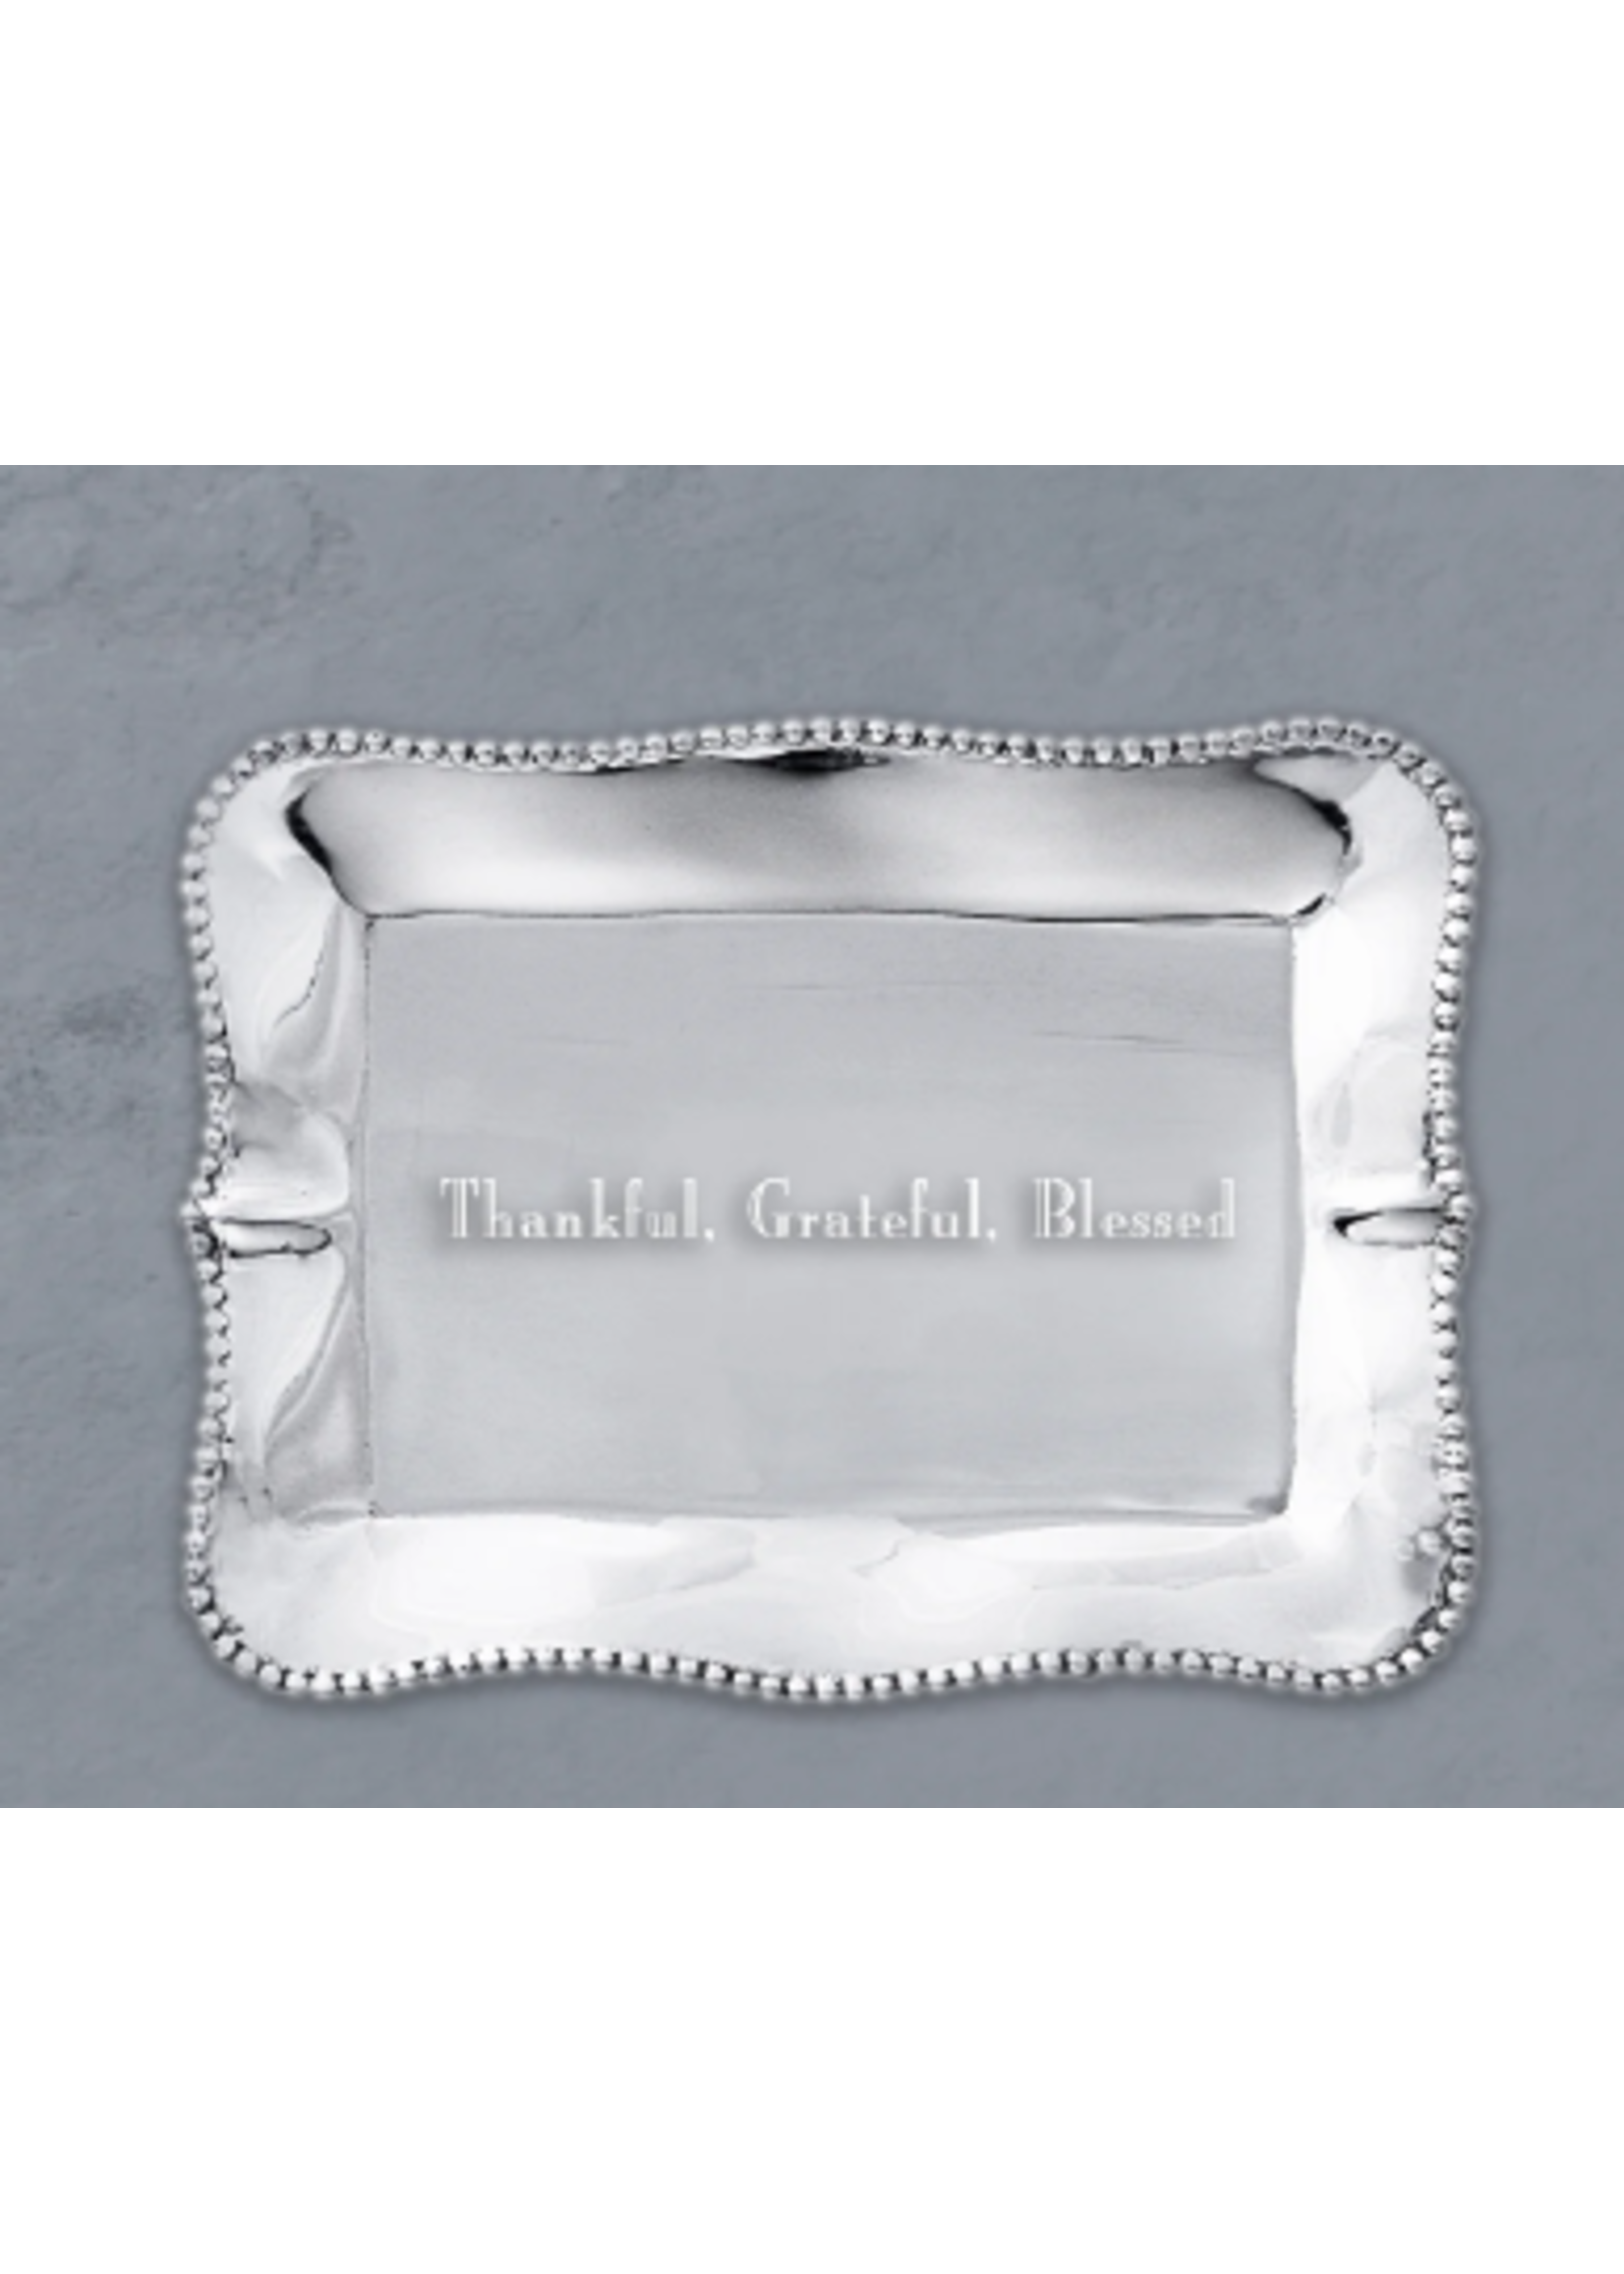 Beatriz Ball Beatriz Ball Pearl Desnisse Thankful, Greatful, Blessed Rectangle Tray